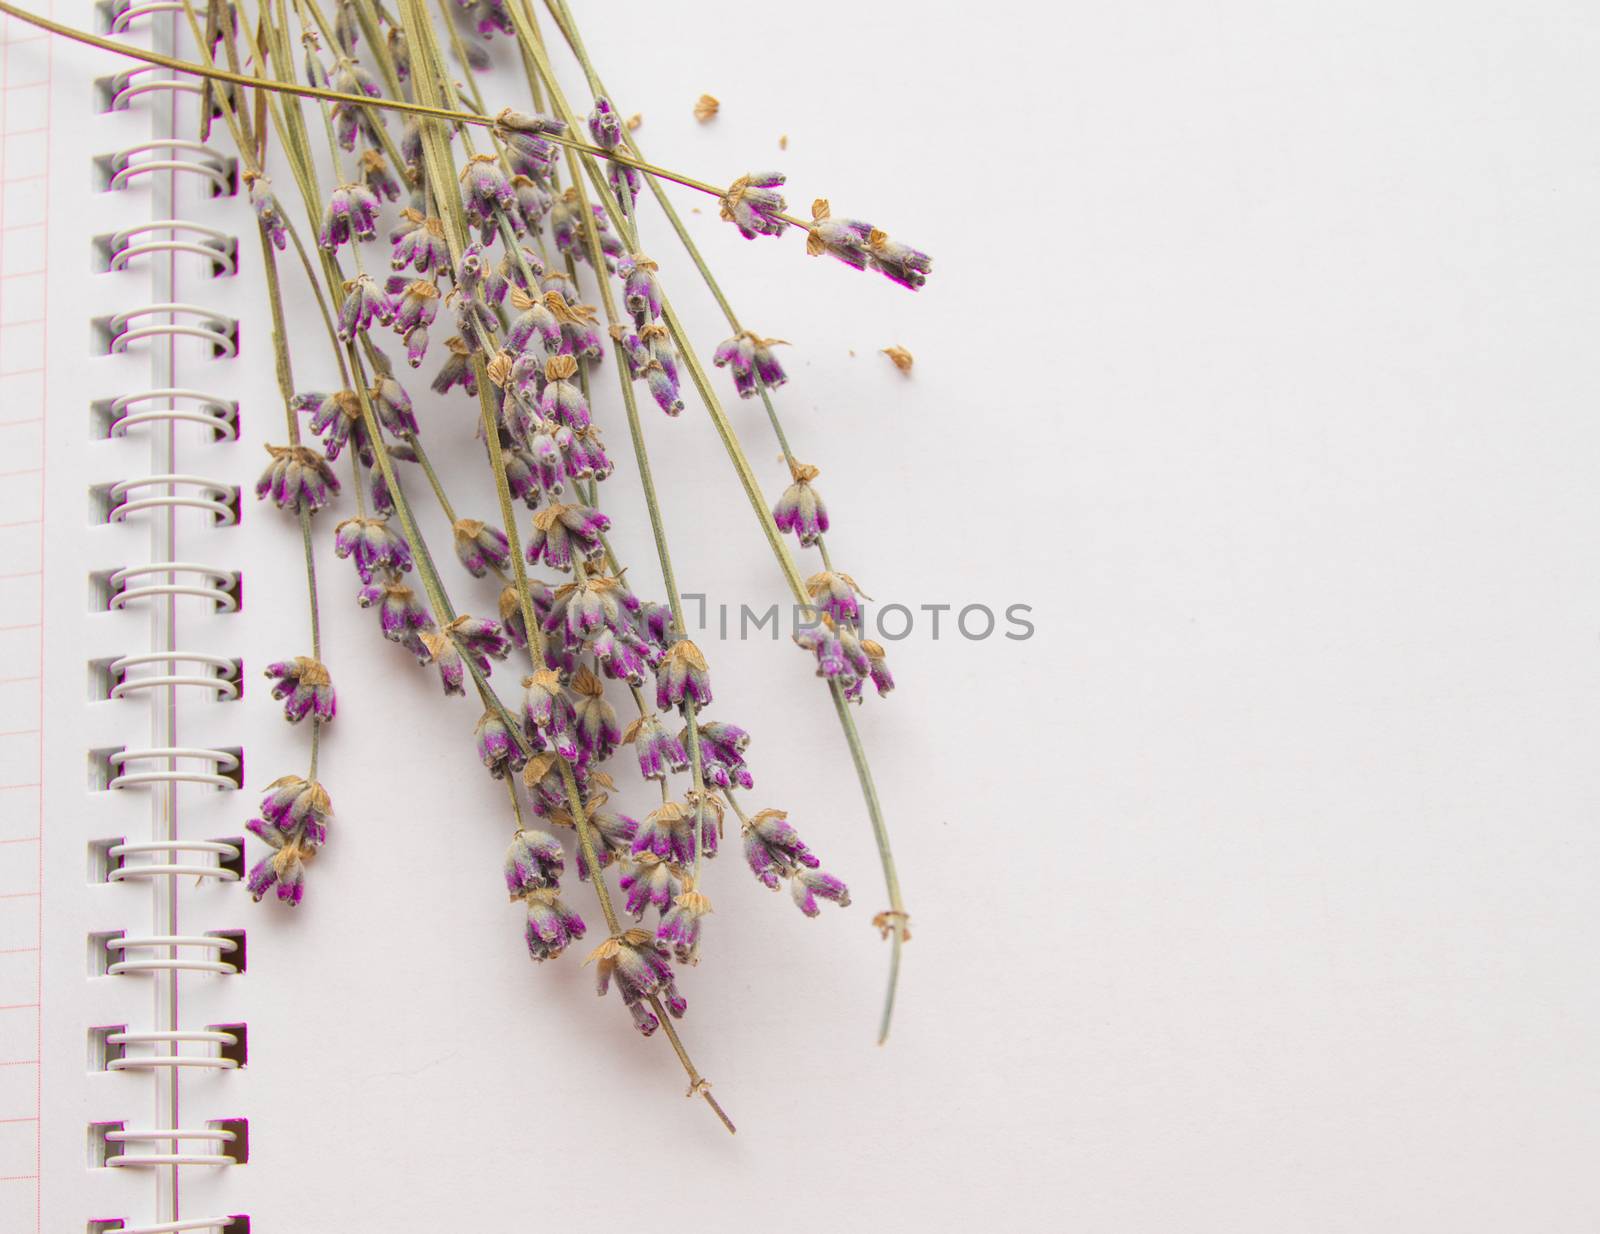 Lavender flowers lying on an open notebook, CONCEPT FLAT LAY, TOP VIEW closeup by claire_lucia